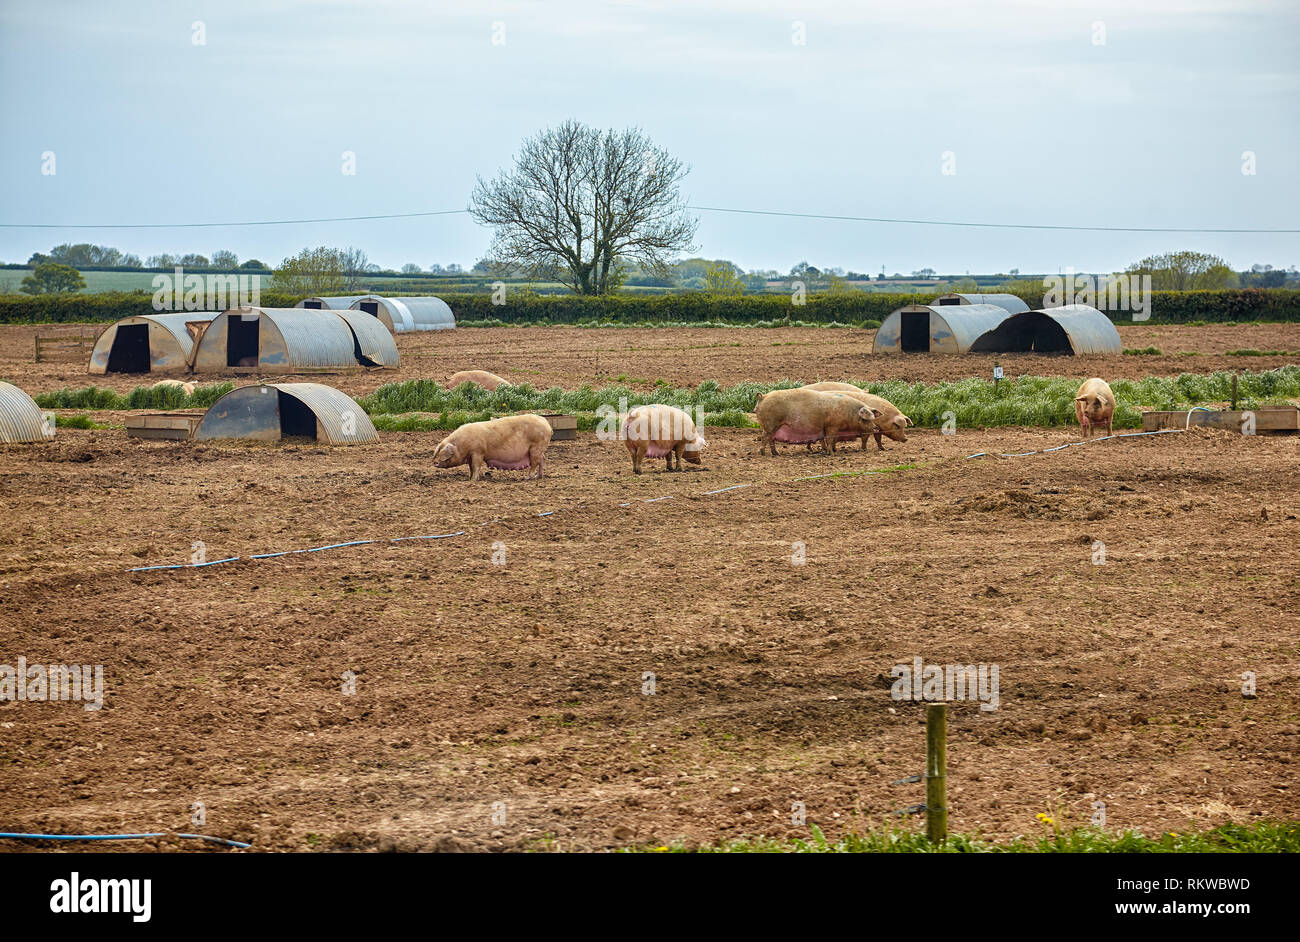 The view of the pigs near the pig ark on the outdoor pig unit in Devon. England Stock Photo